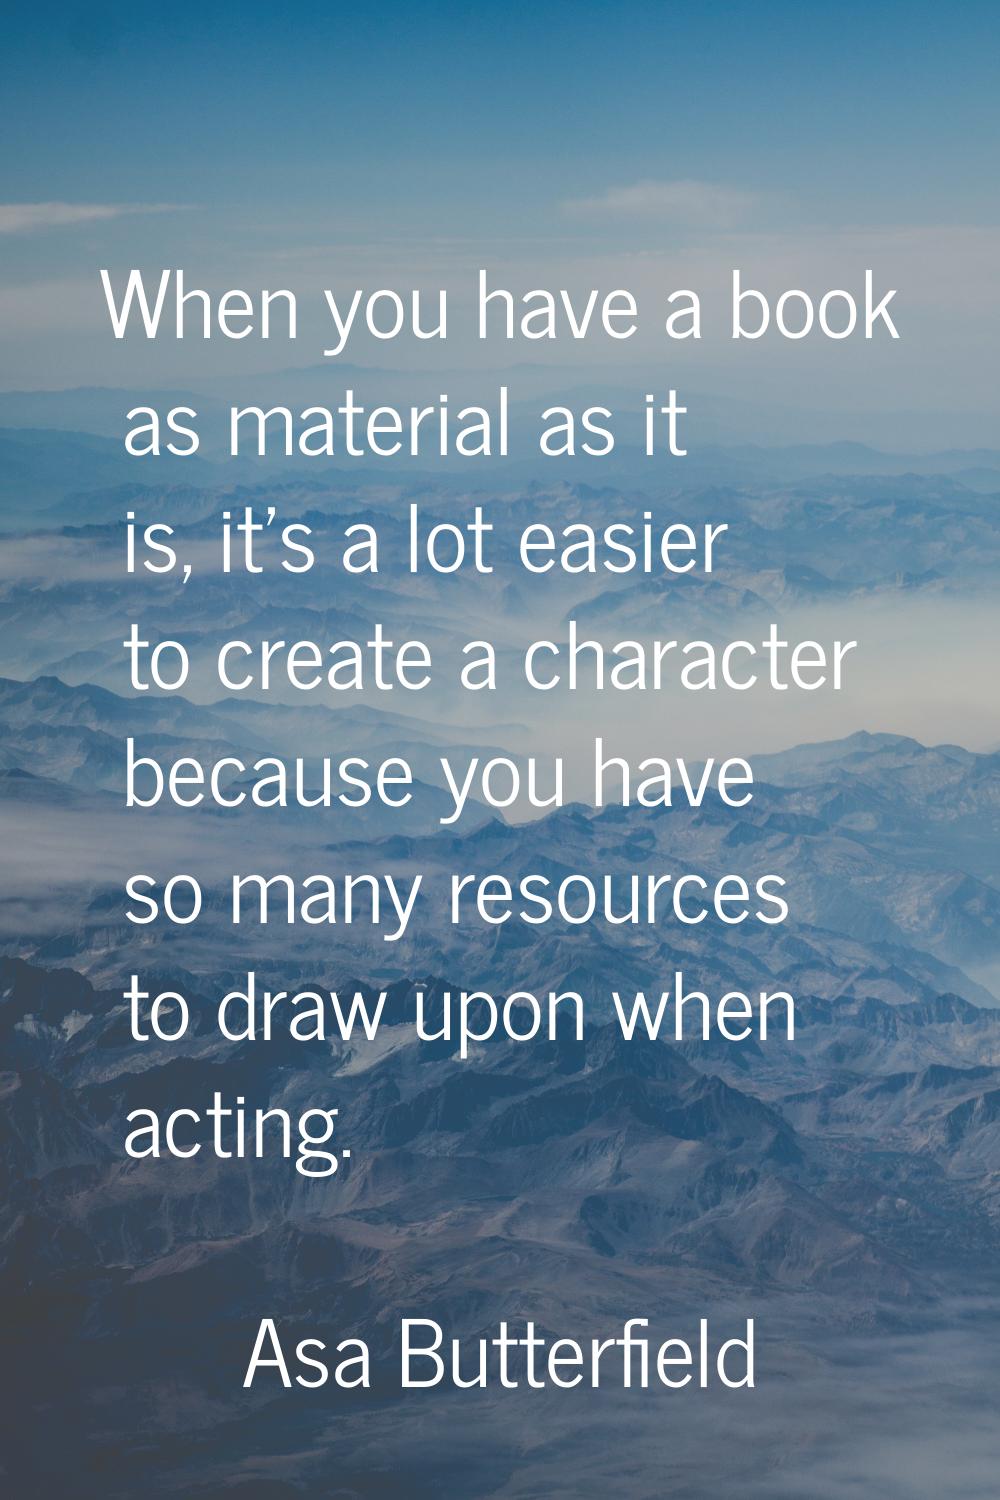 When you have a book as material as it is, it's a lot easier to create a character because you have